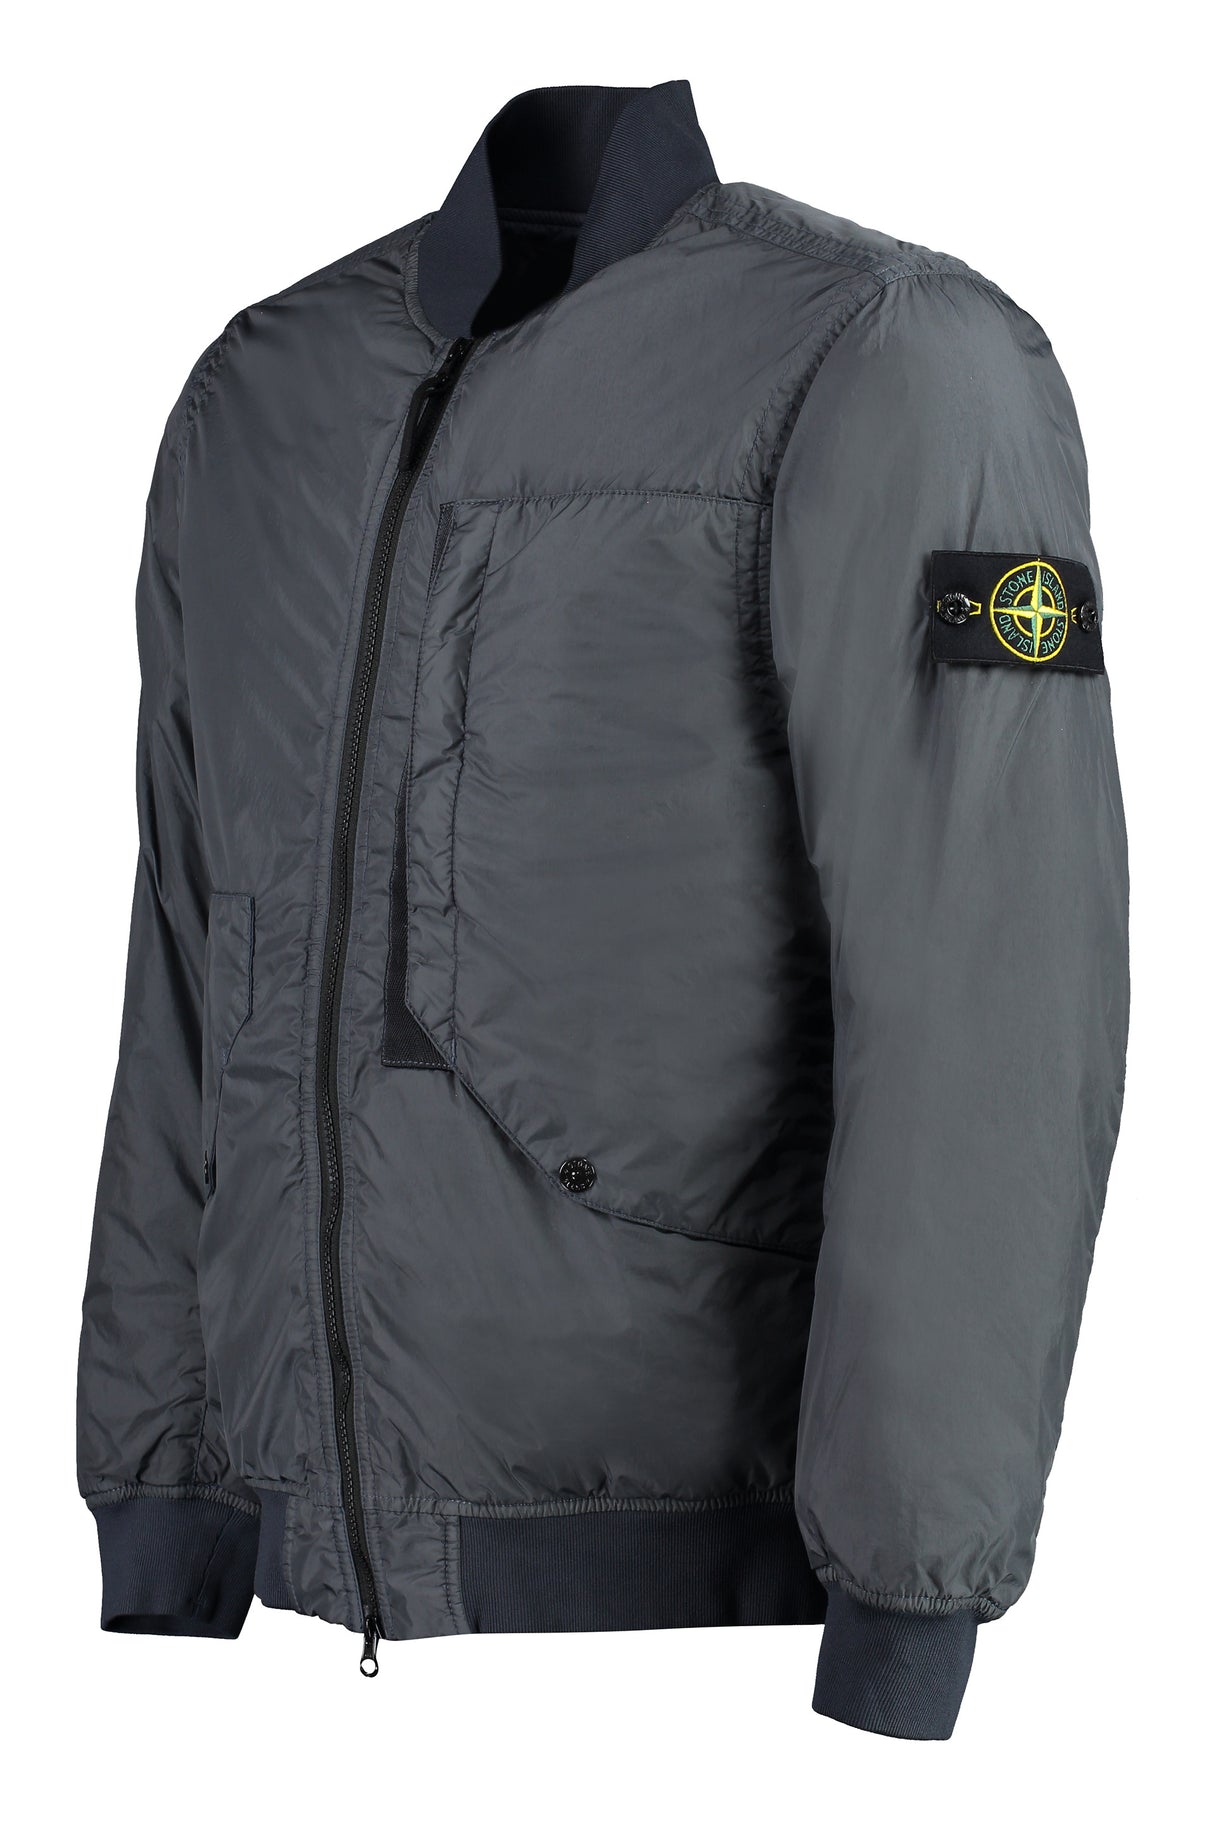 STONE ISLAND Grey Nylon Bomber Jacket for Men - Made from Recycled Materials